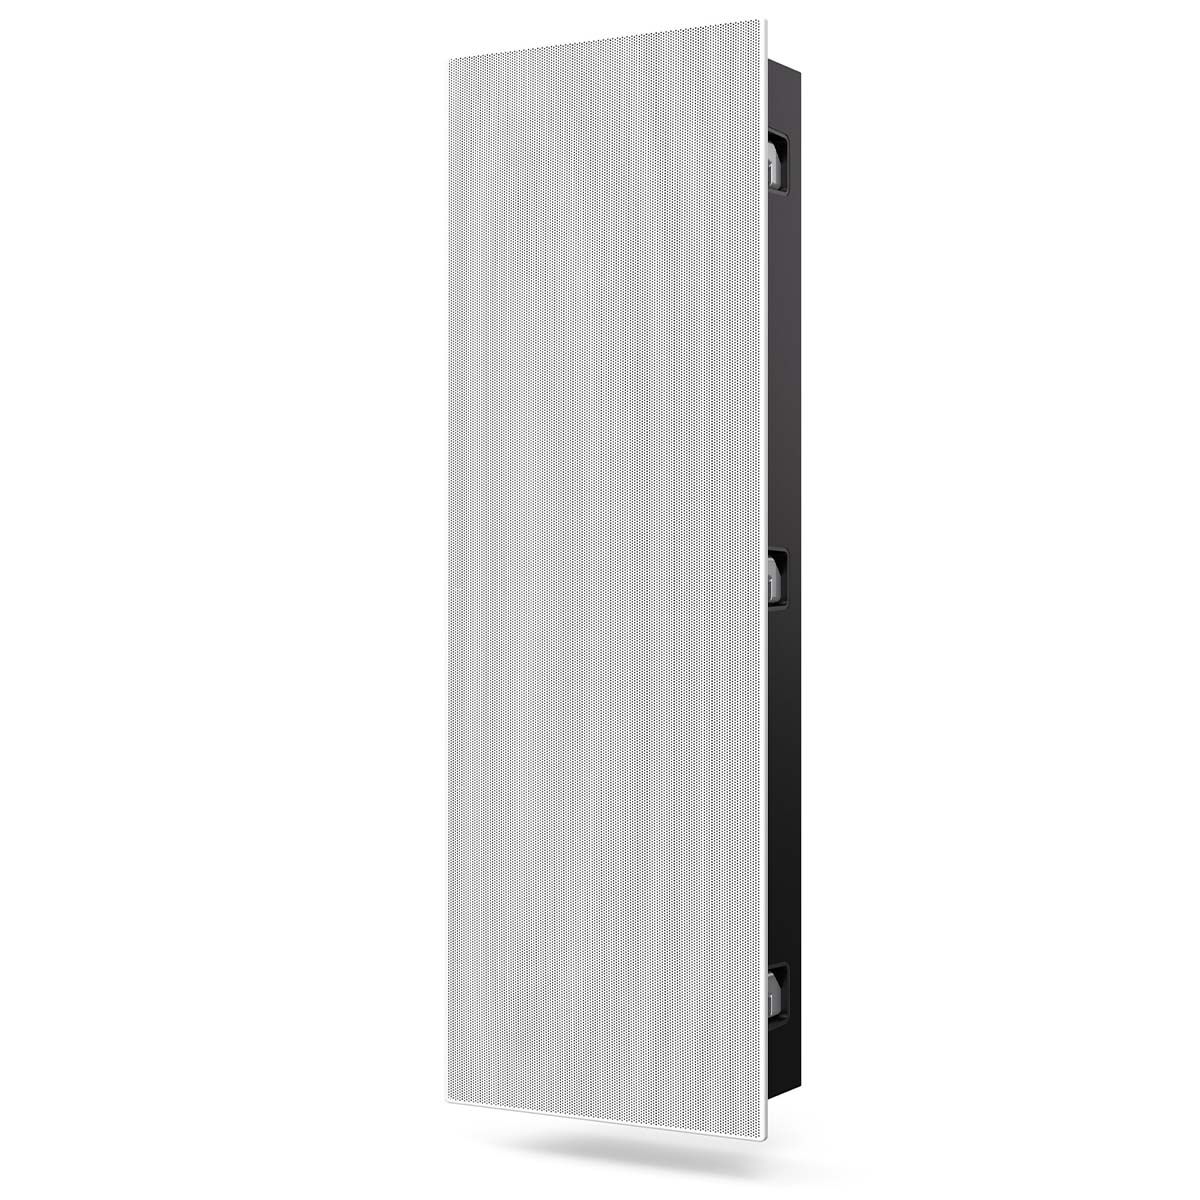 MartinLogan Tribute 5XW In-Wall Speaker on white background with grille
